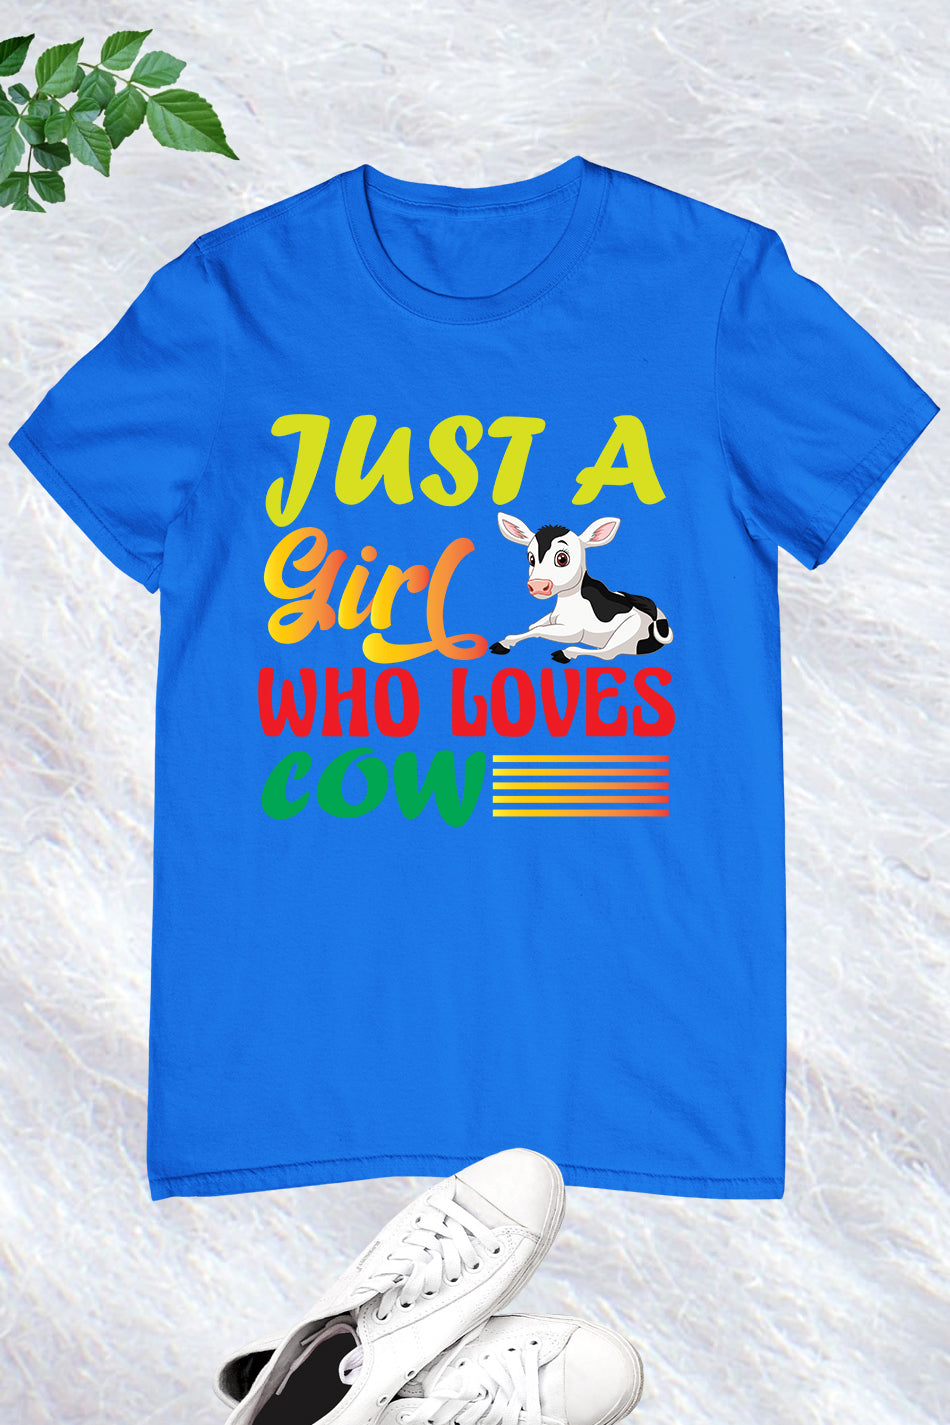 Just a Girl Who Loves Cow T-Shirt